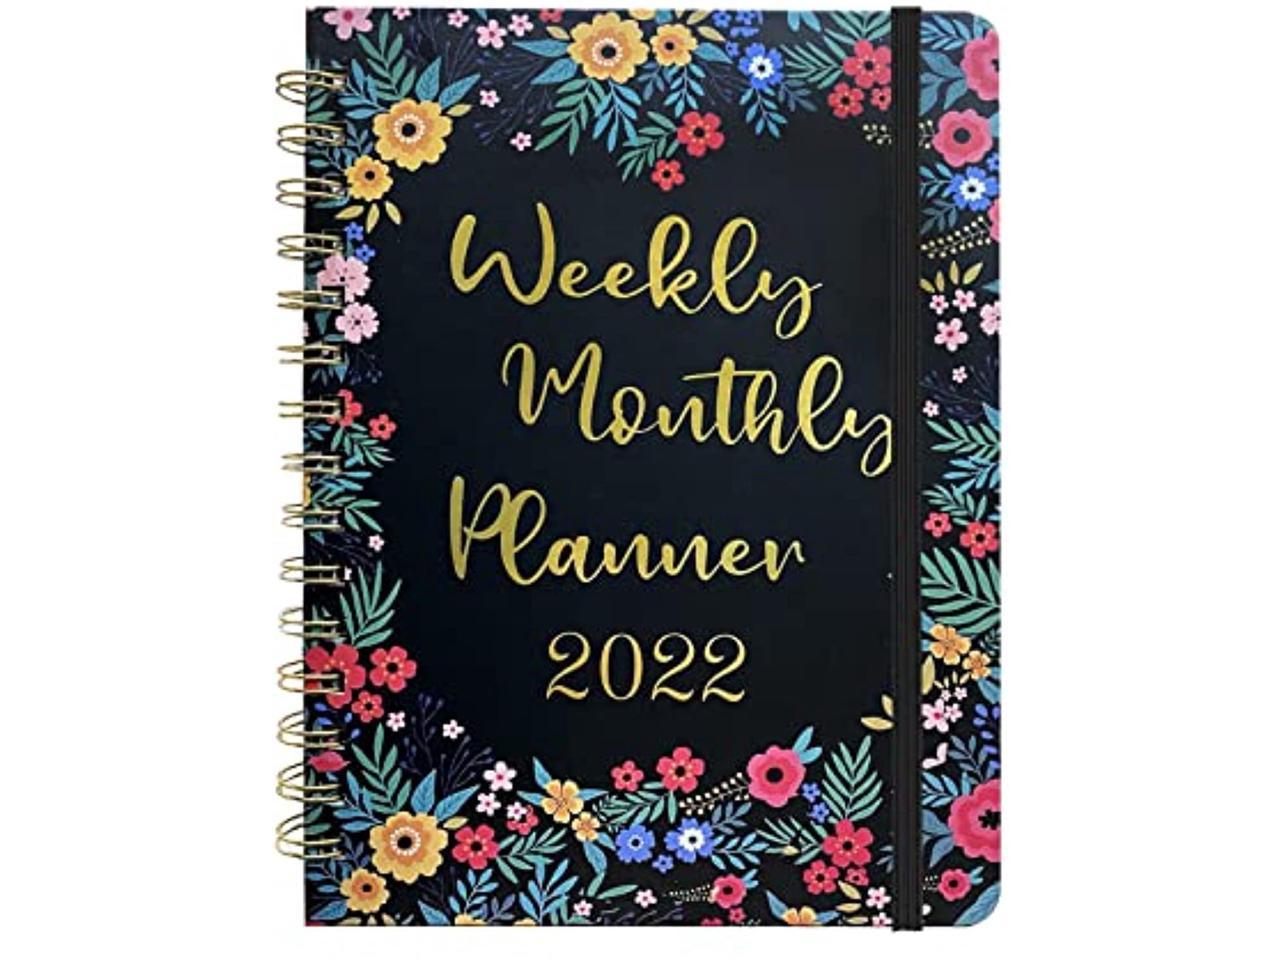 2022 Planner Perfect for Home Dec 2022 Jan 2022 Flexible Floral Hardcover with Thick Paper School and Office Organizing 8 x 10 Weekly & Monthly Planner 2022 with Twin-wire Binding 